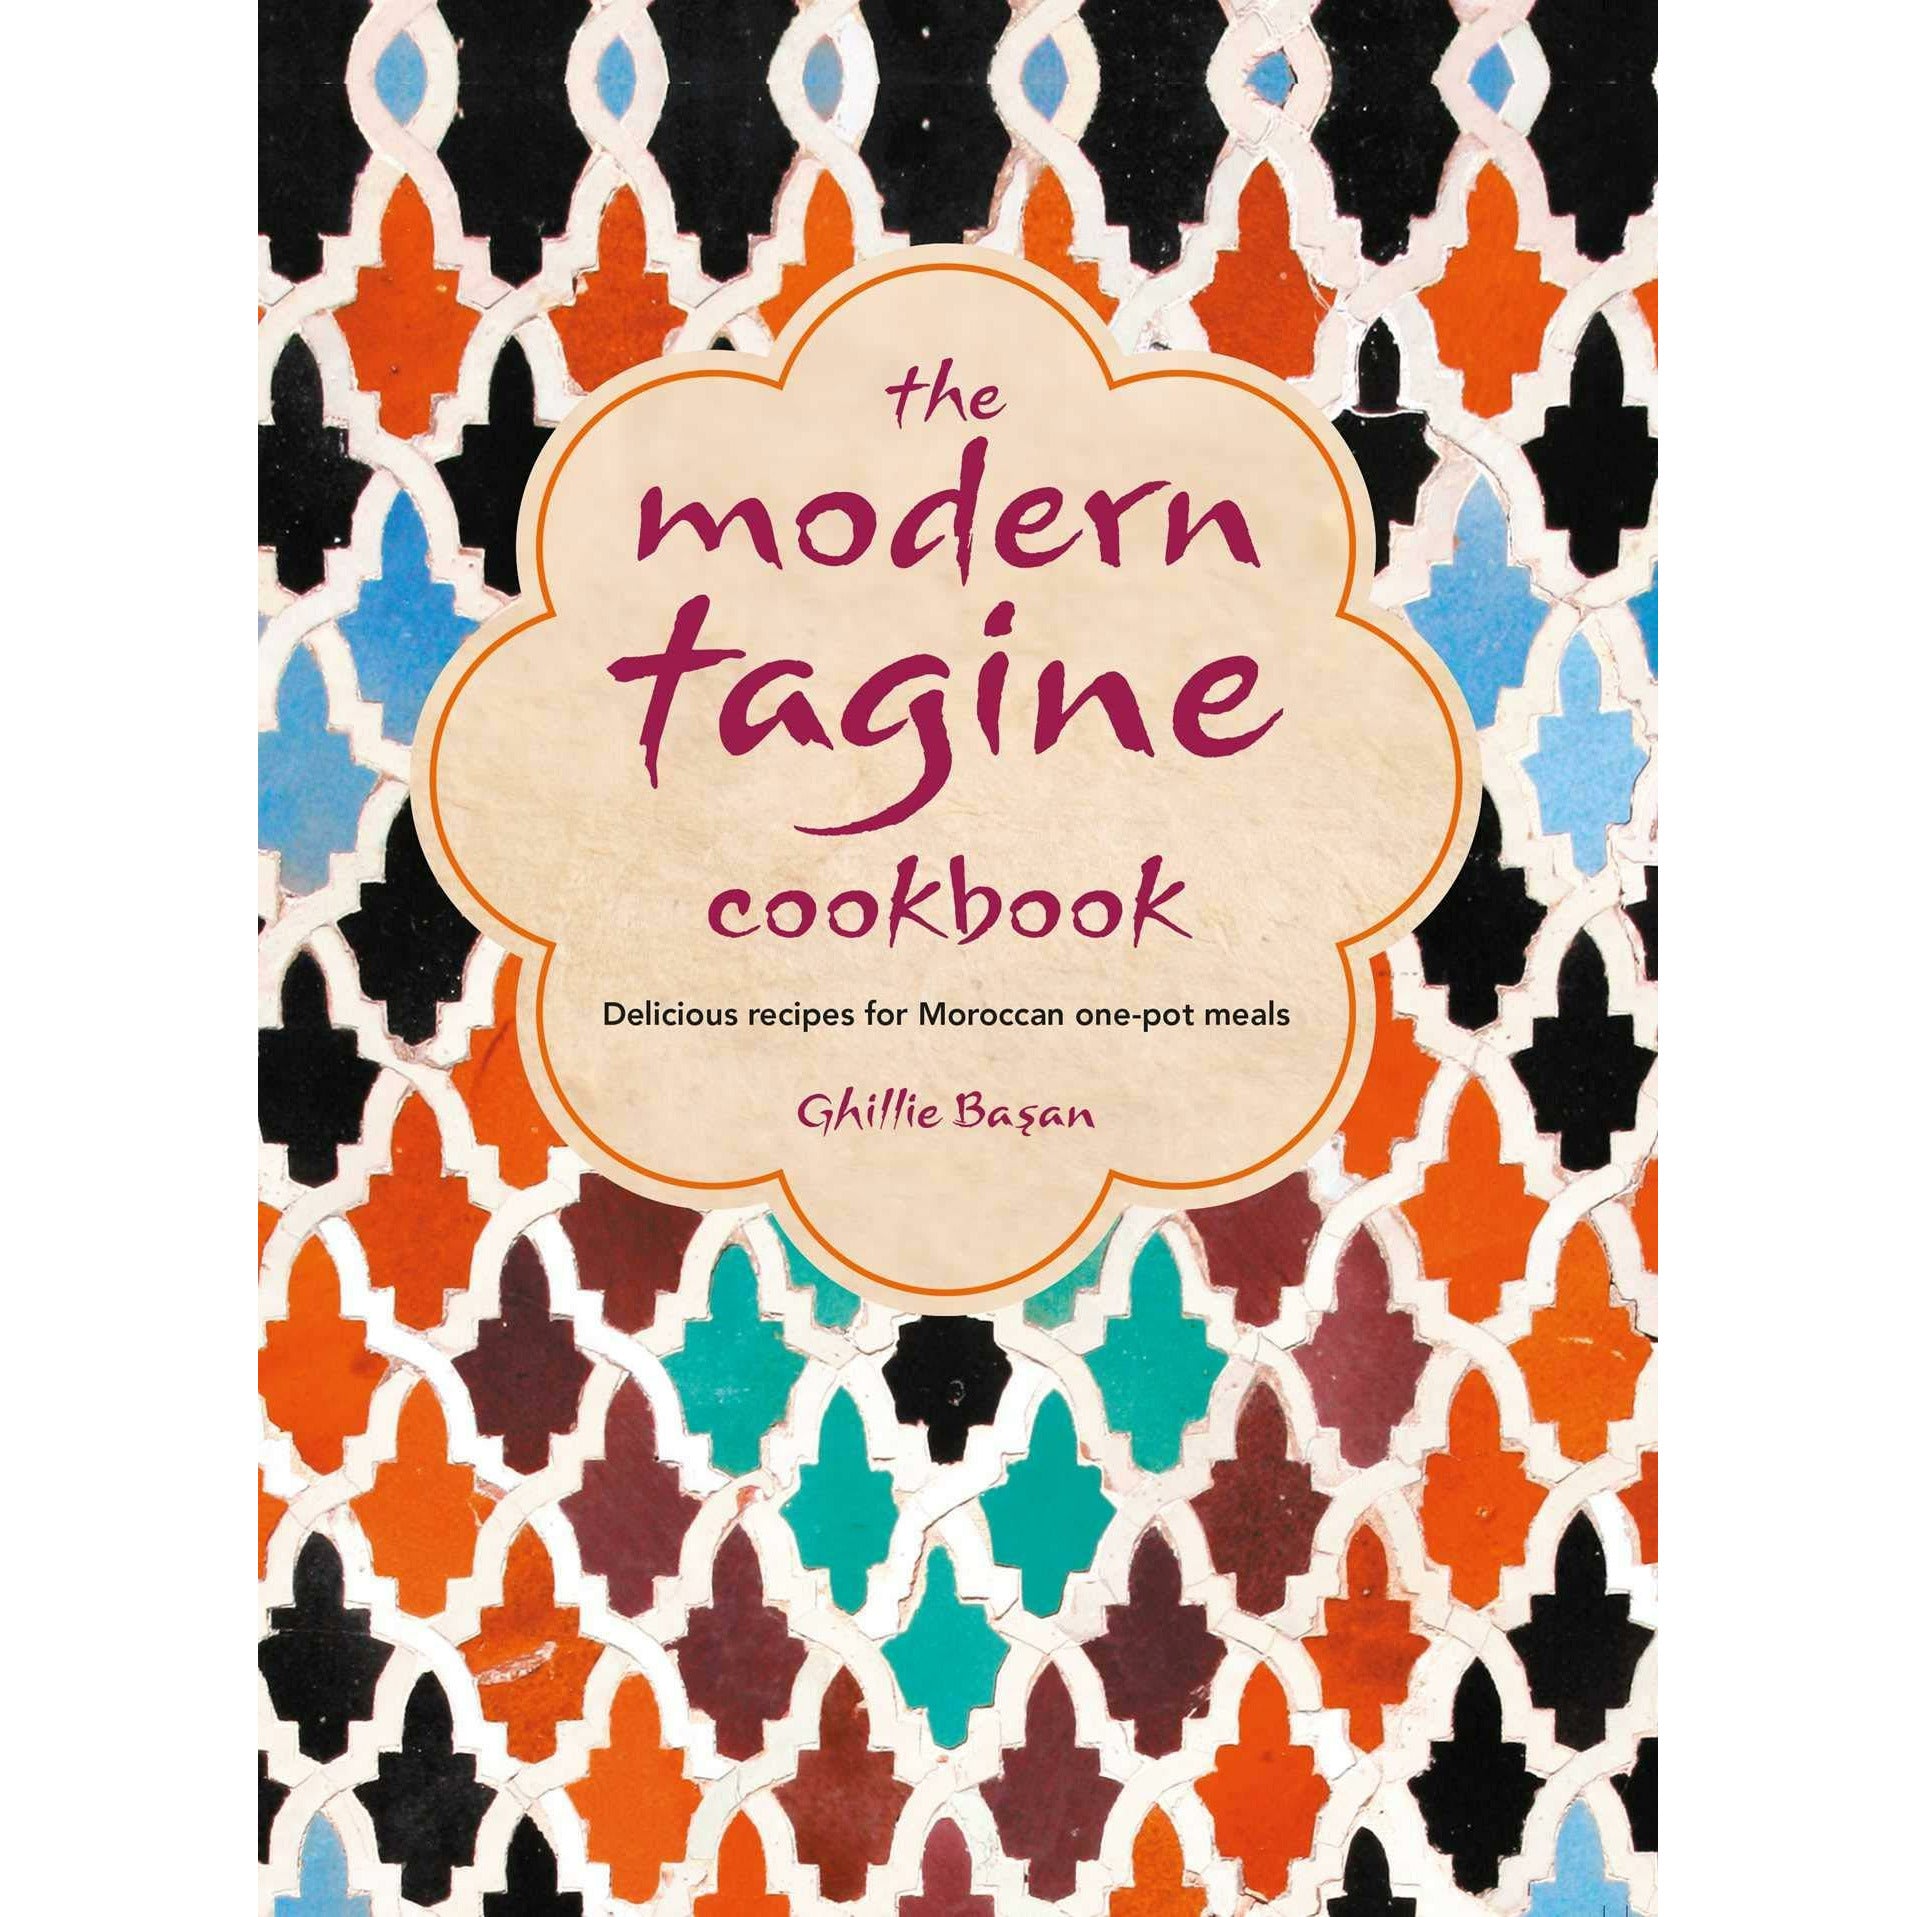 The Modern Tagine Cookbook: Delicious recipes for Moroccan one-pot meals Hardcover – August 13, 2019